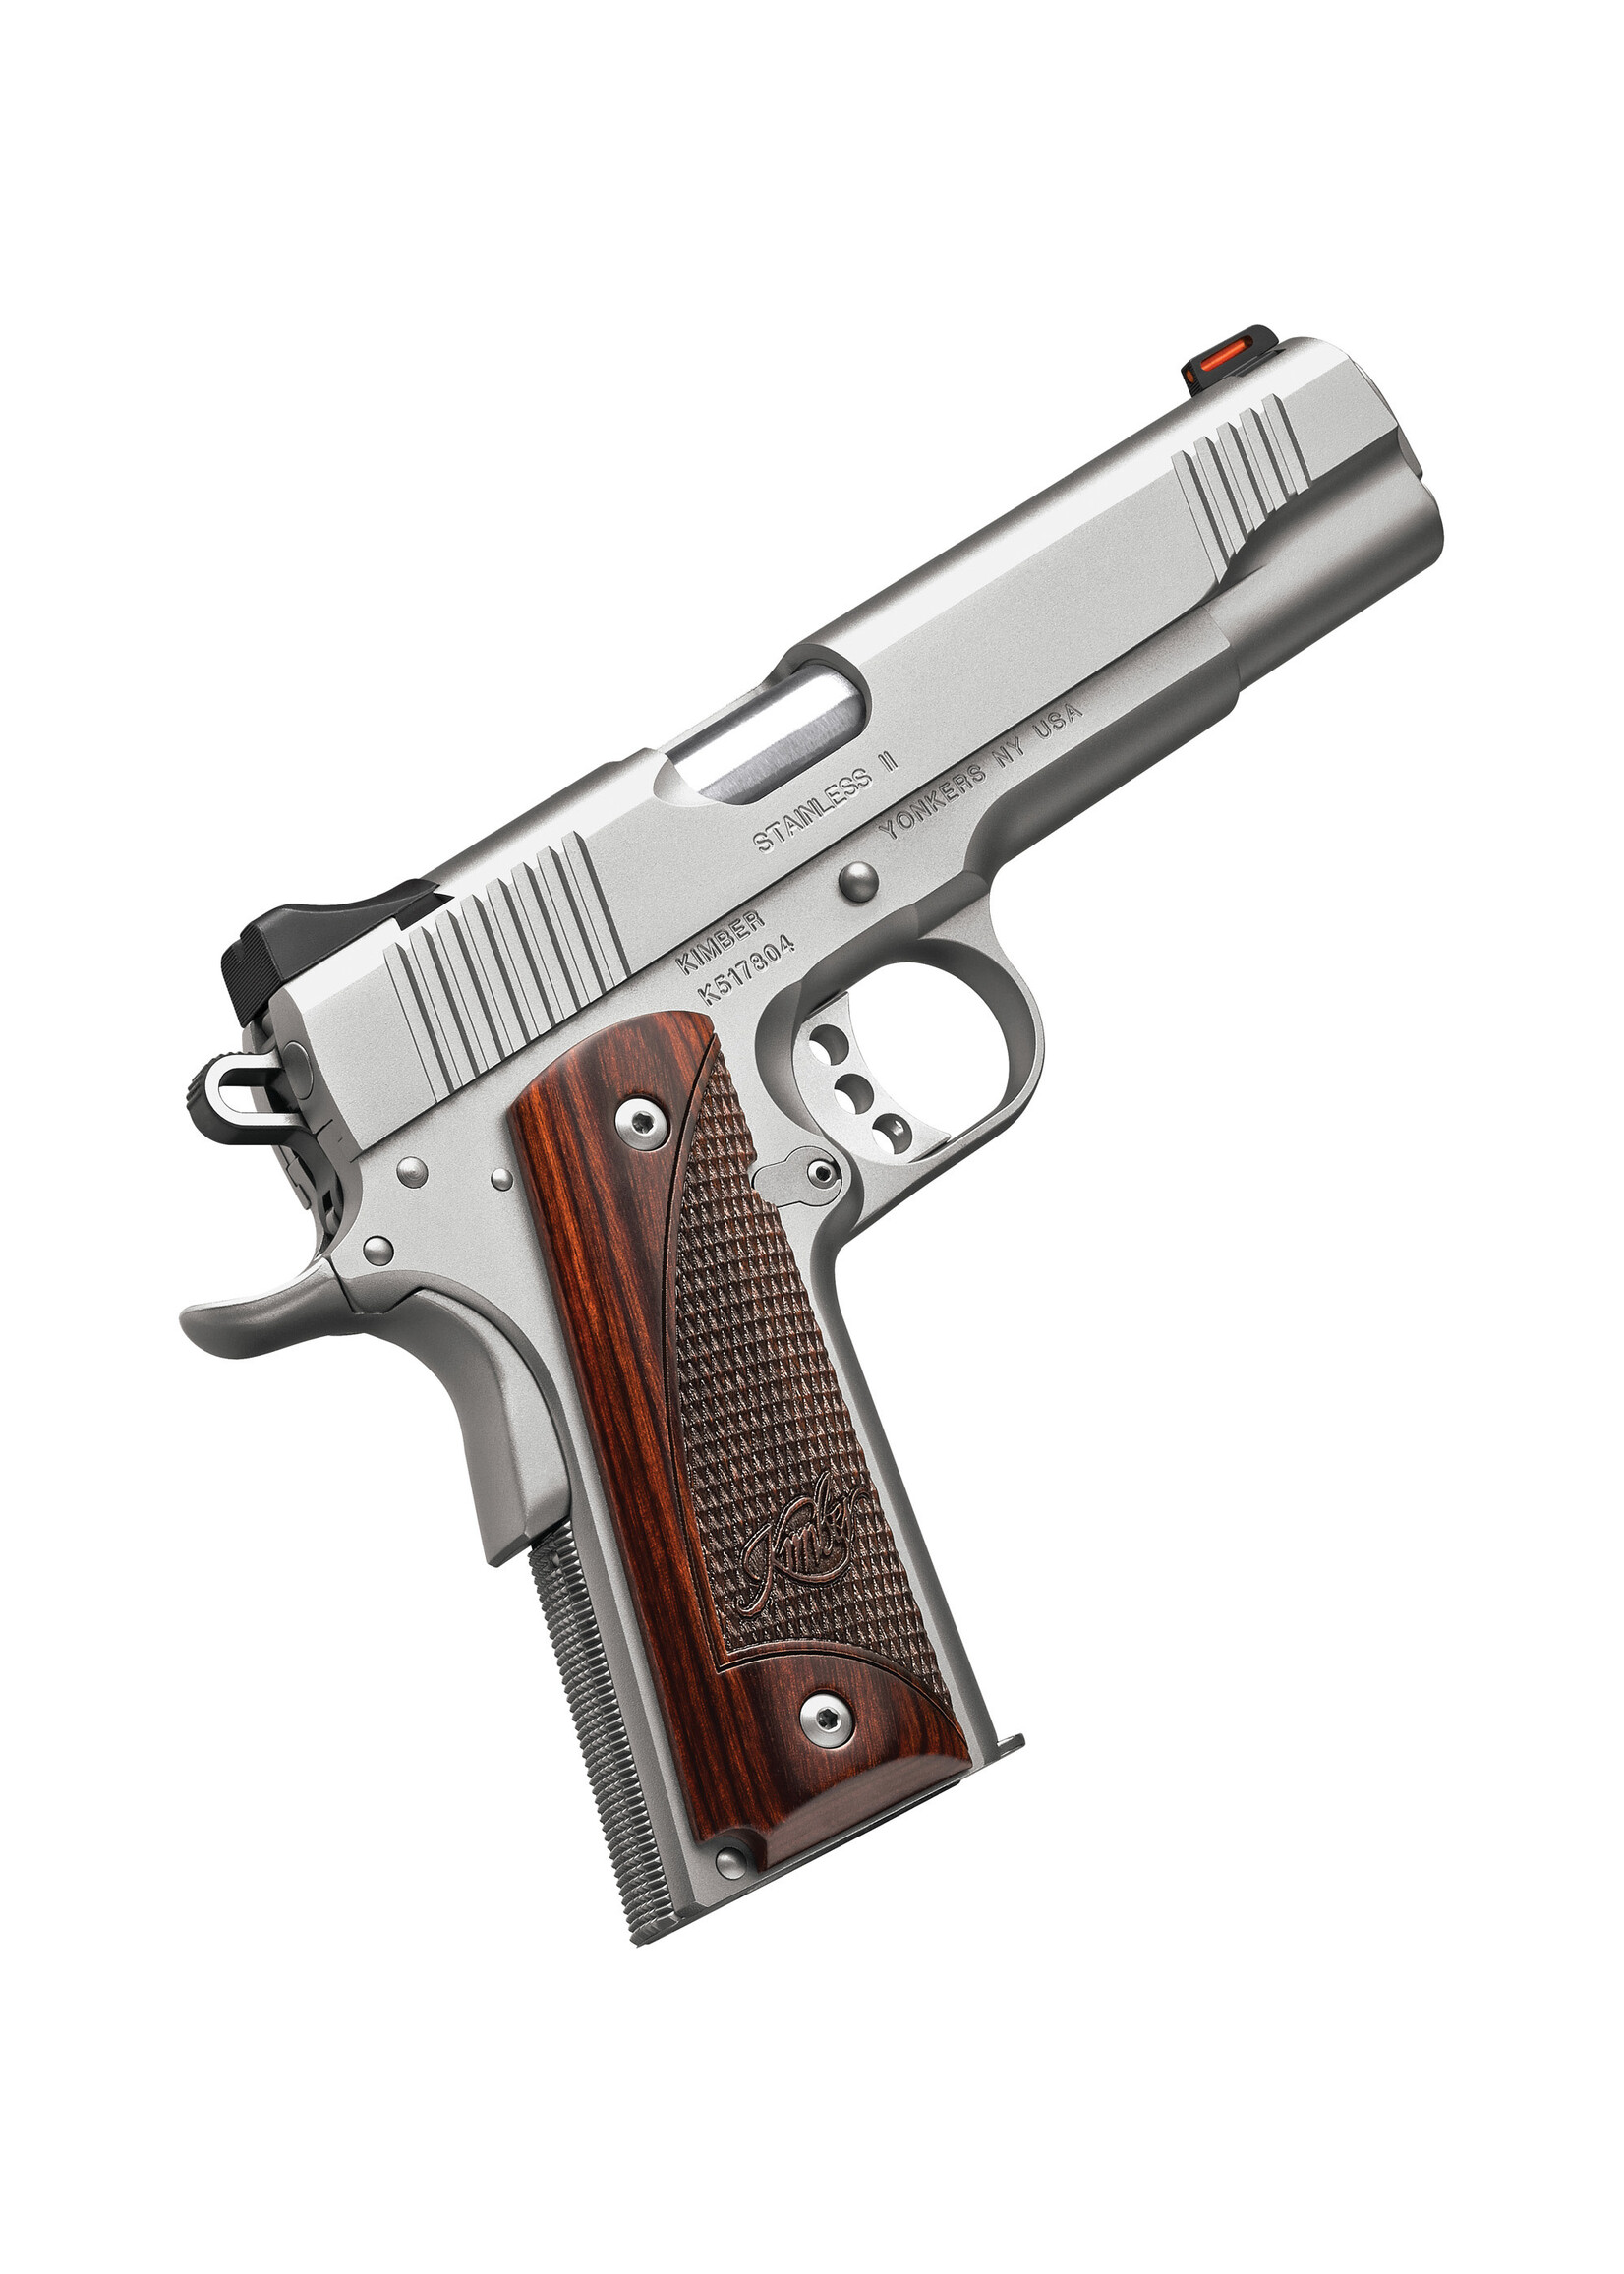 Kimber Kimber, Stainless Target, 1911, Semi-automatic, Full Size, 10MM, 5" Barrel, Matte Finish, Silver, Wood Grips, Fiber Optic Front Sight, 8 Rounds